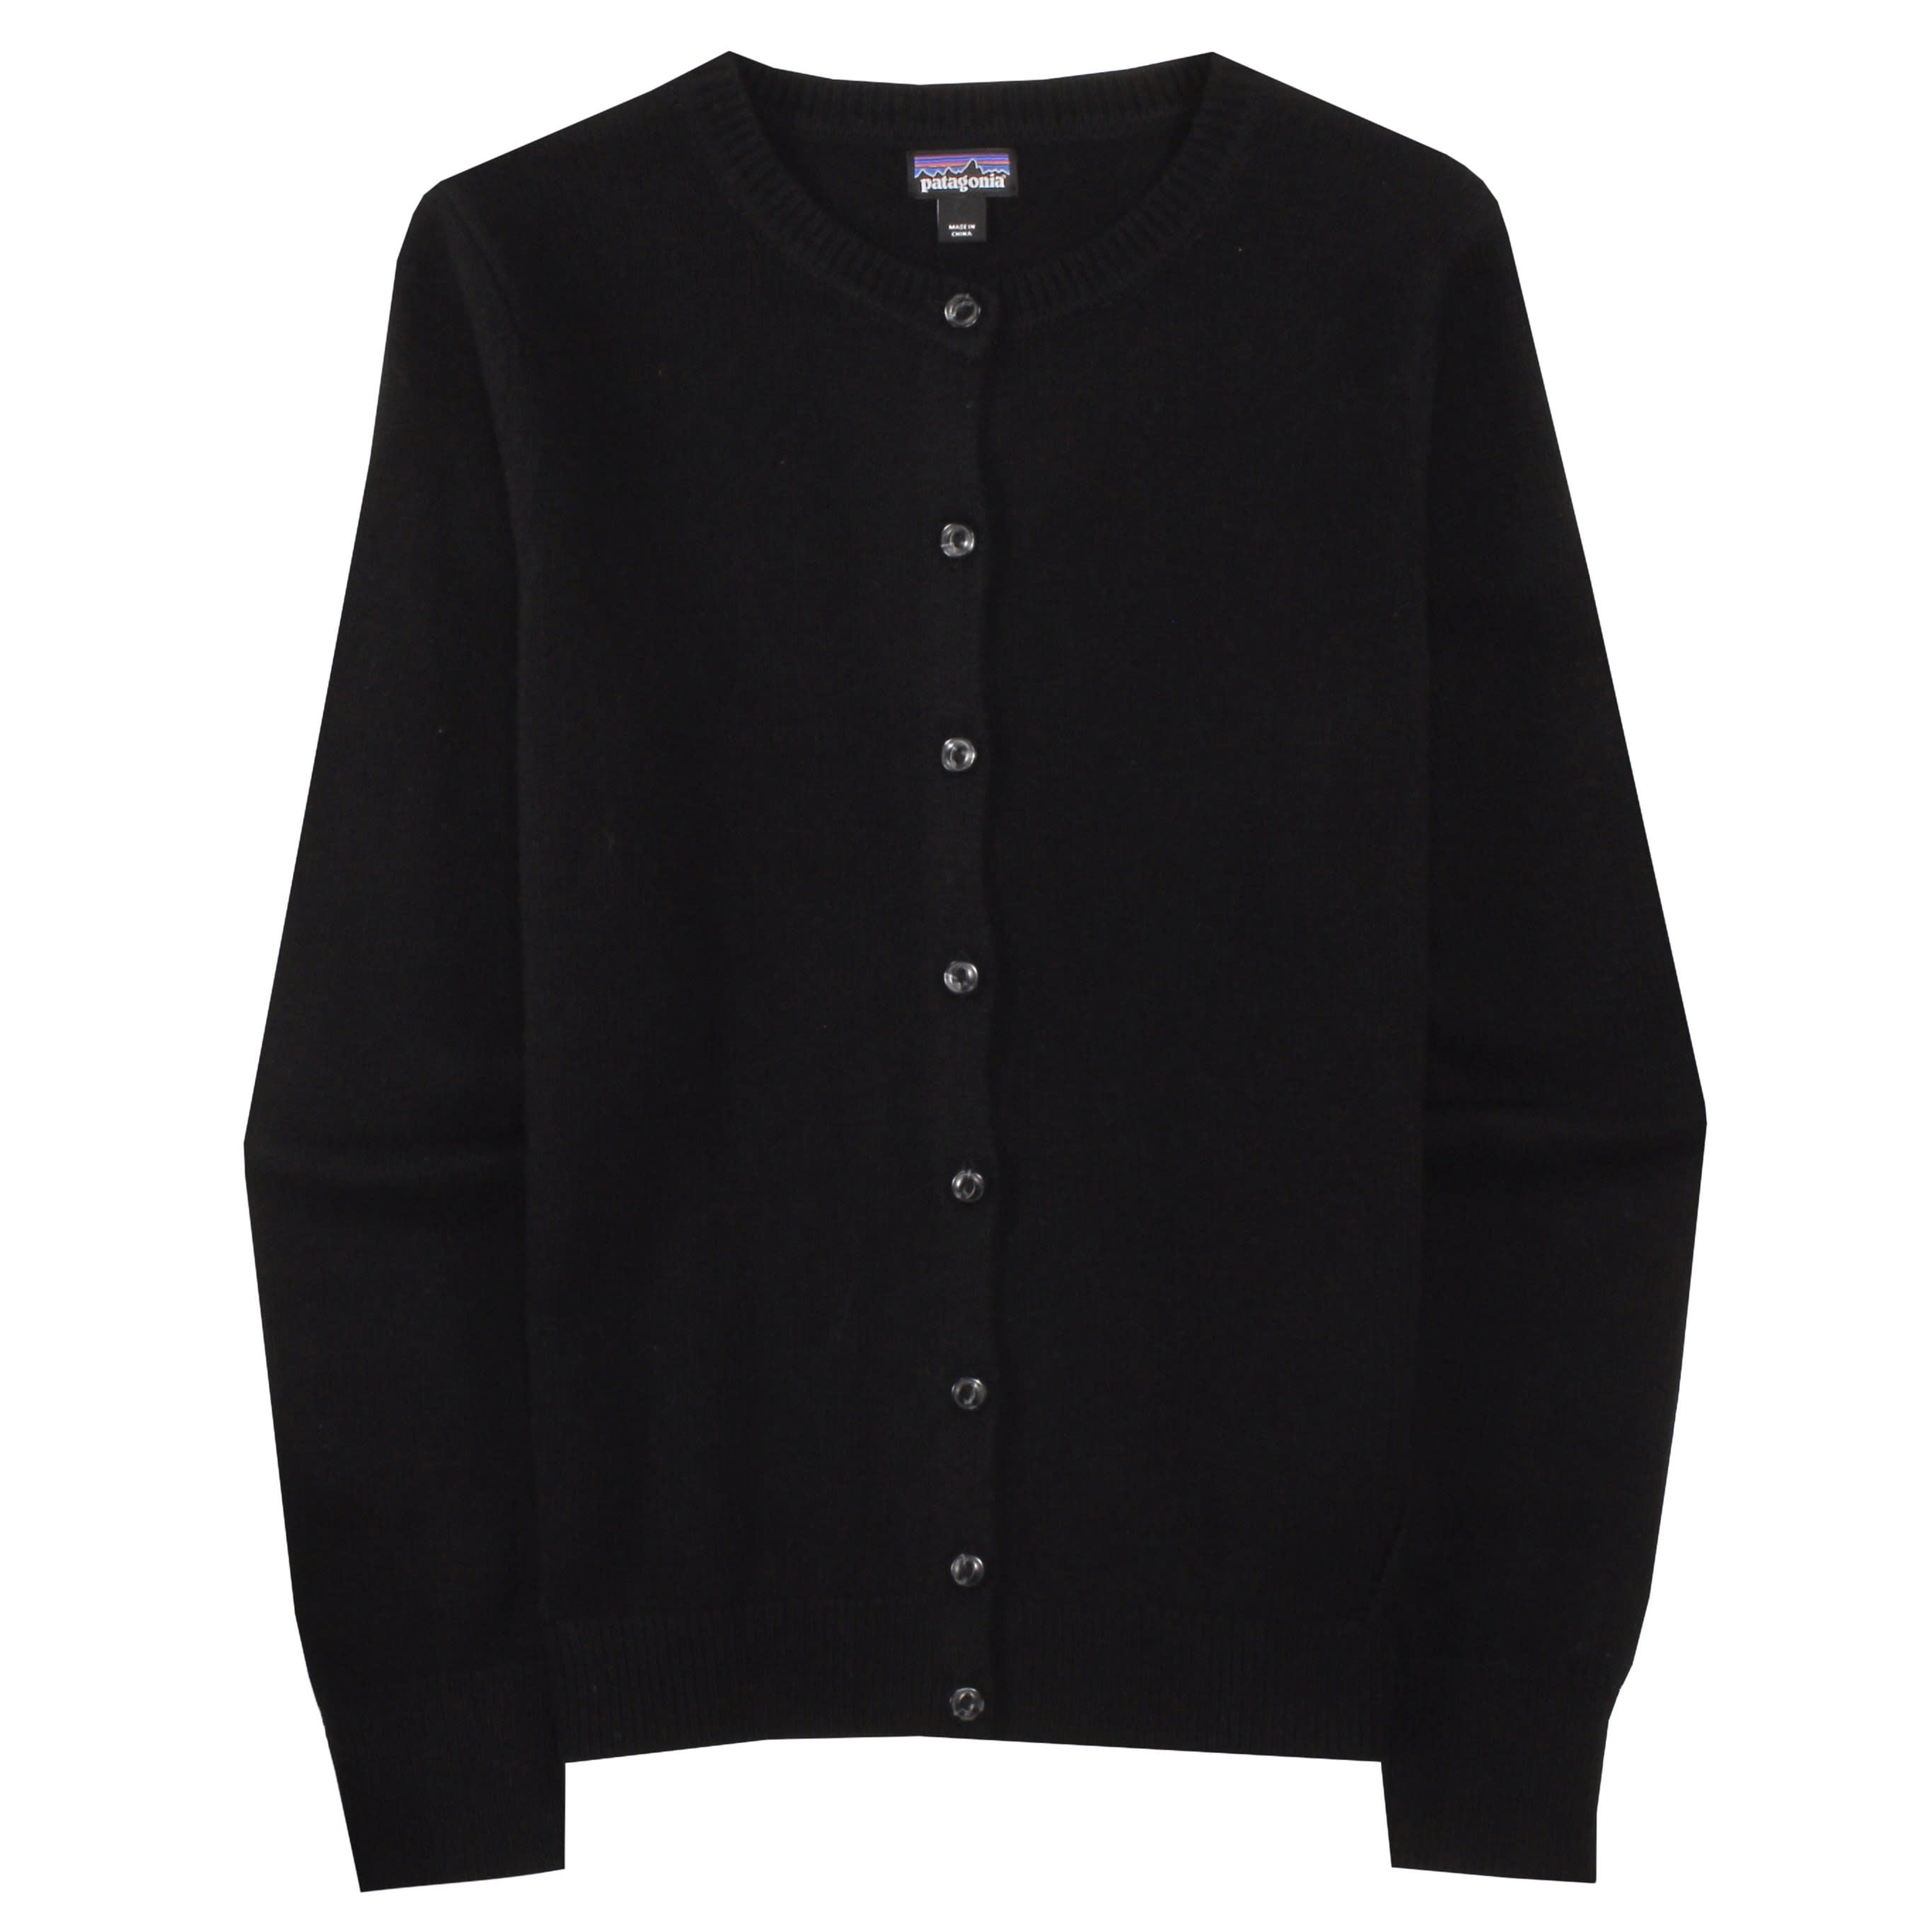 W's Recycled Cashmere Cardigan